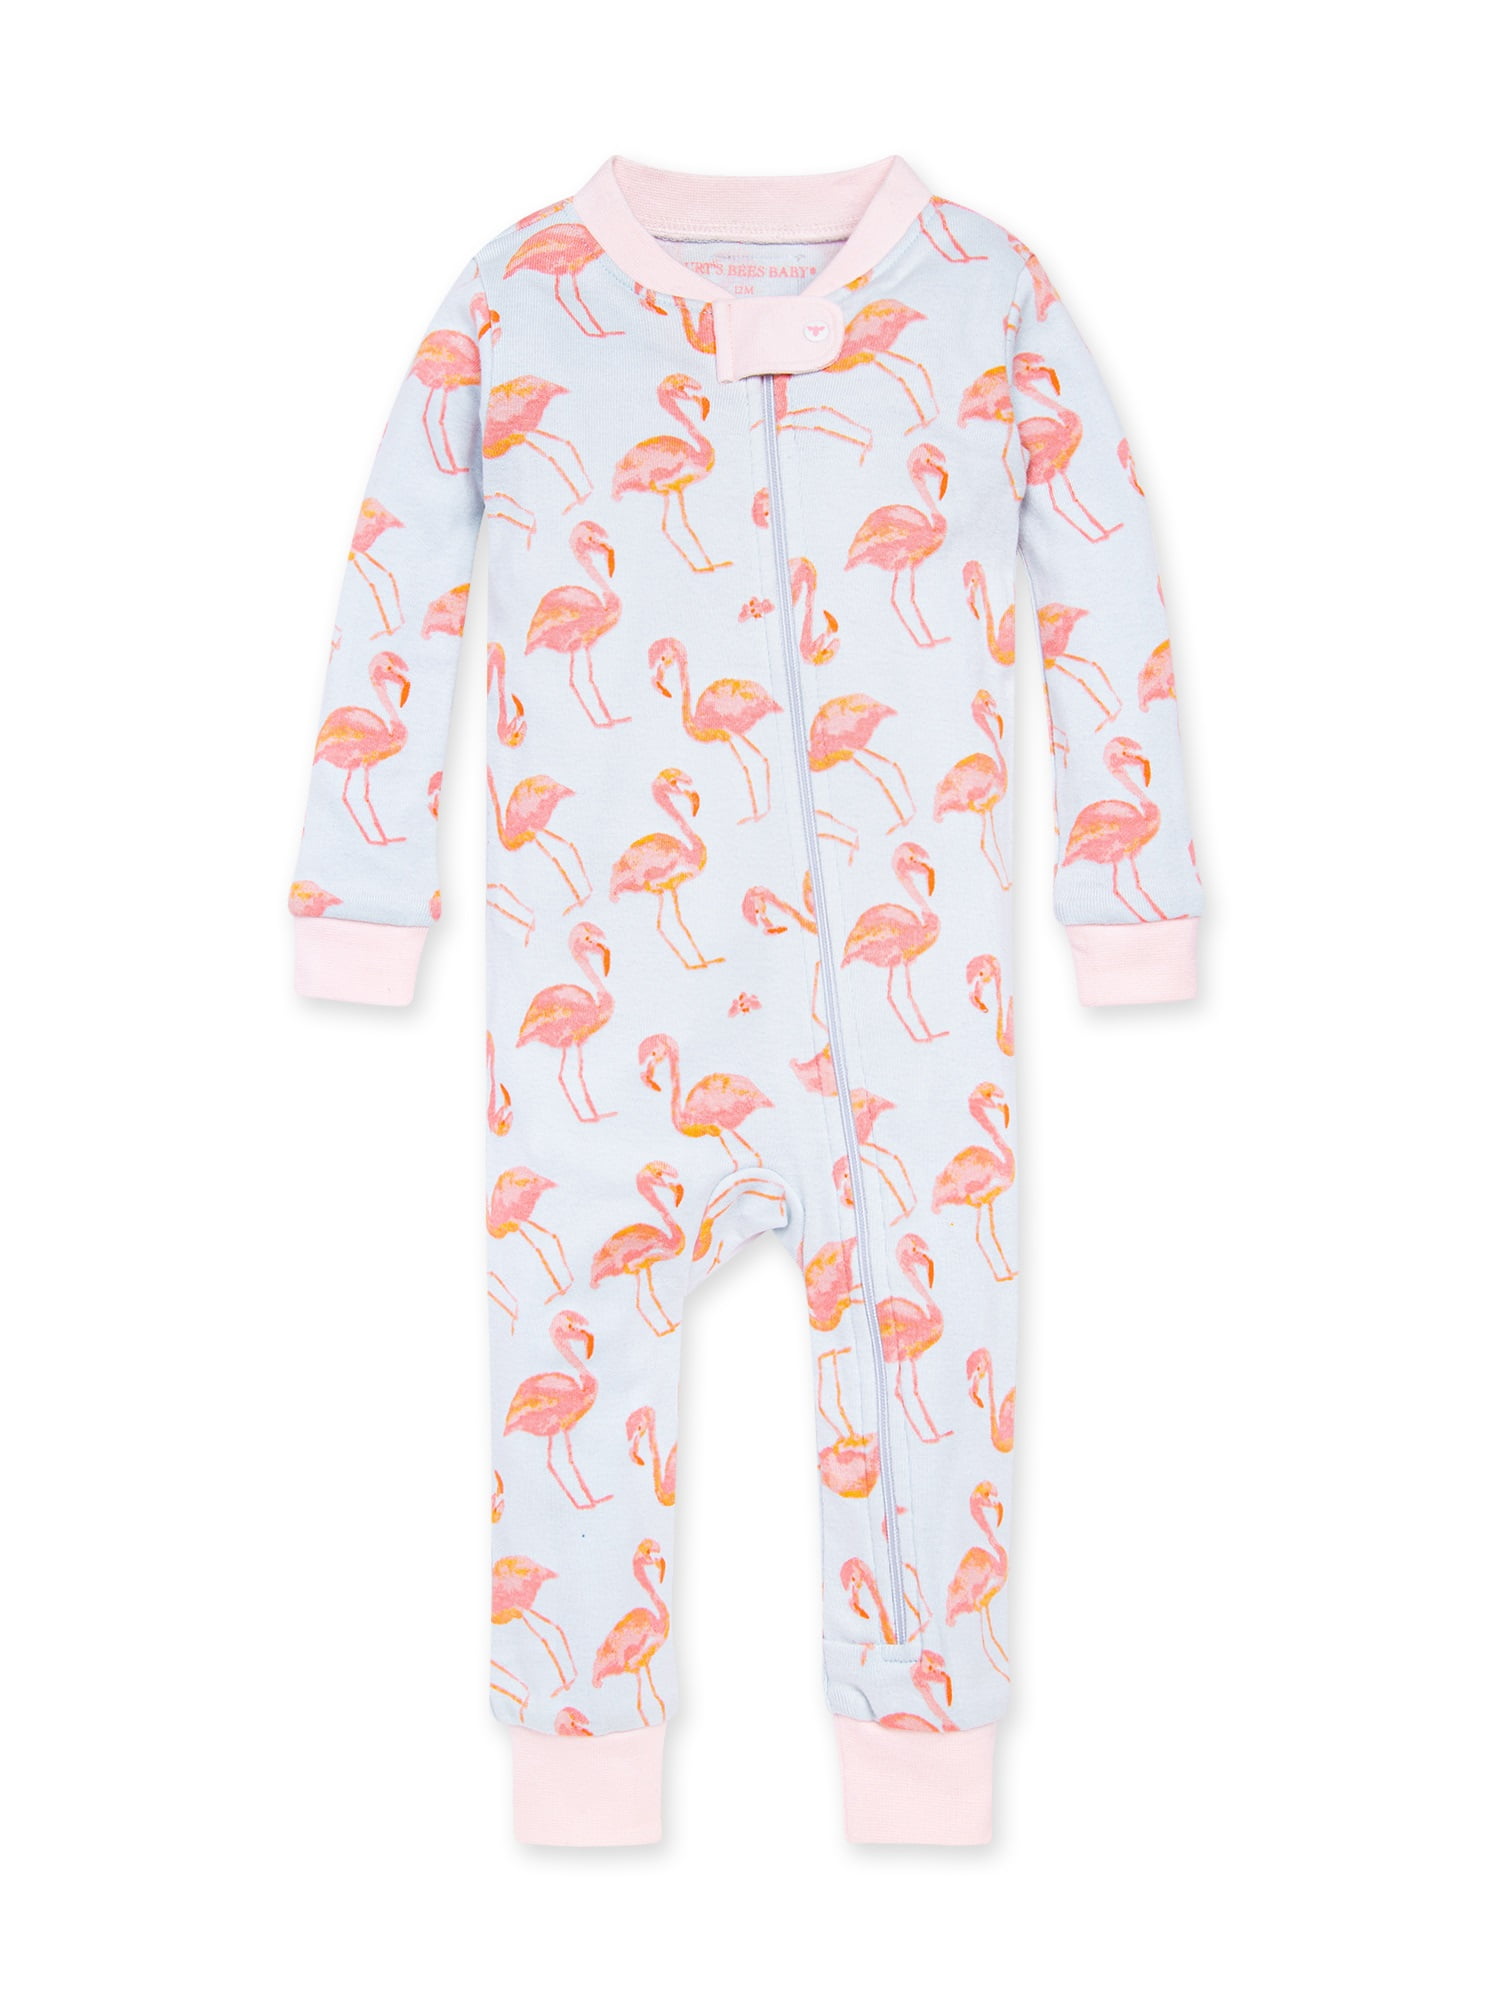 Dragonfly Life Burts Bees Baby Baby Girls LY27747-SLM-18M Toddler Sleepers 18 Months 